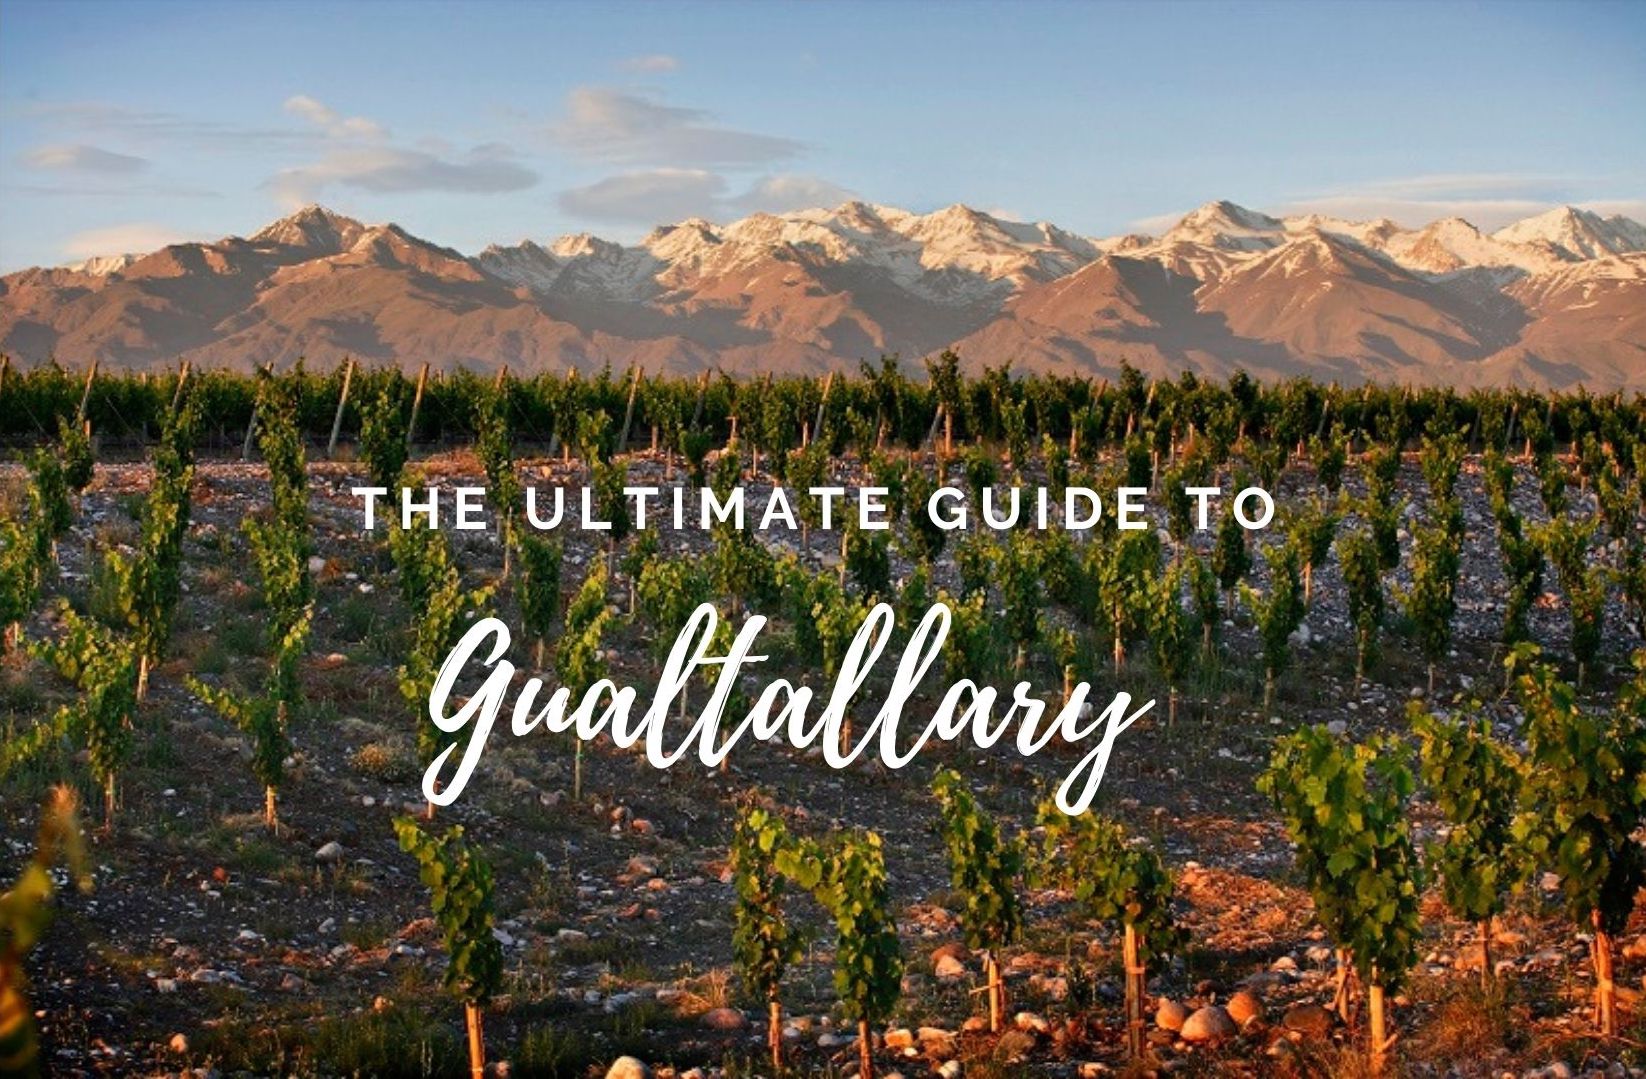 the ultimate guide to gualtallary wine region in the Uco Valley, Argentina